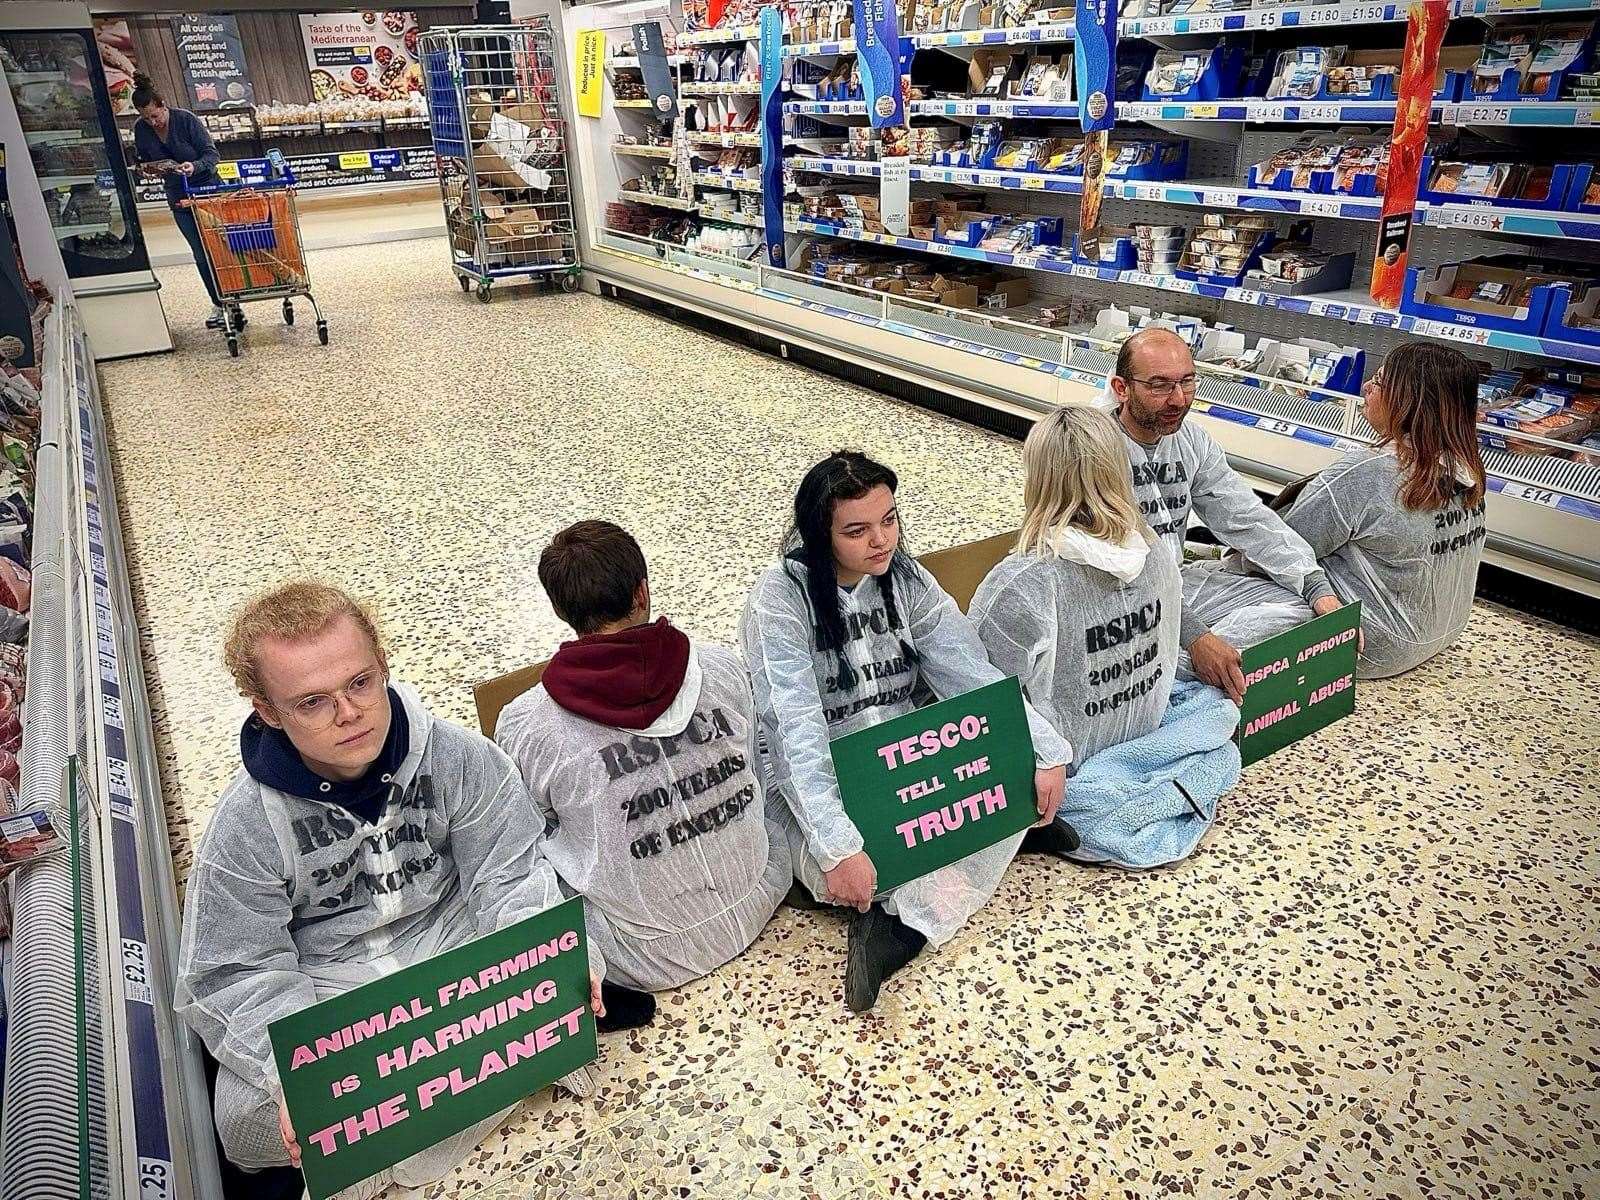 Six people from Animal Rising - a group campaigning for a transition to a plant-based food system - protested in the meat aisle at Crooksfoot Tesco in Willesborough, Ashford. Picture: Animal Rising